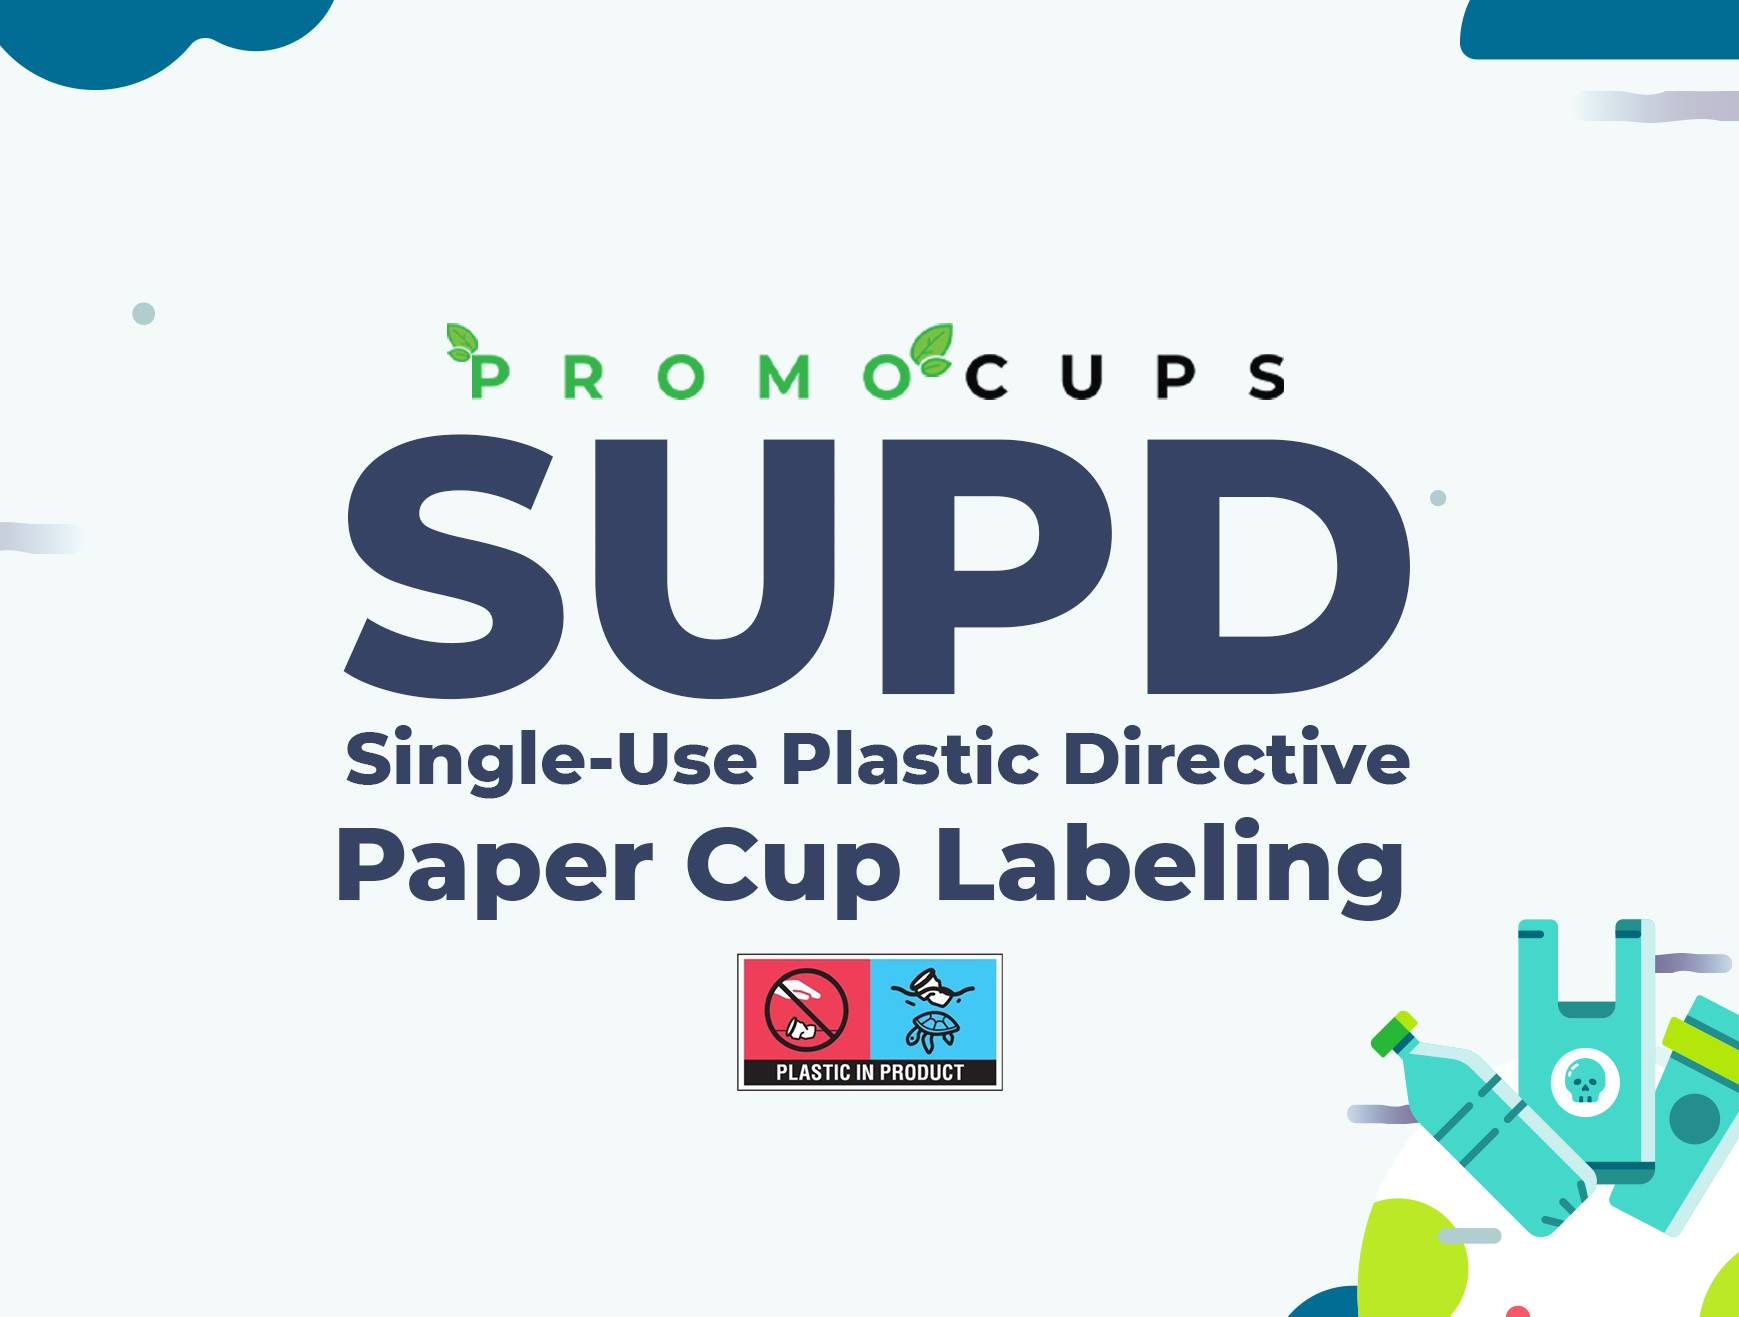 Promocups | Our initiatives to comply with the new SUPD rules